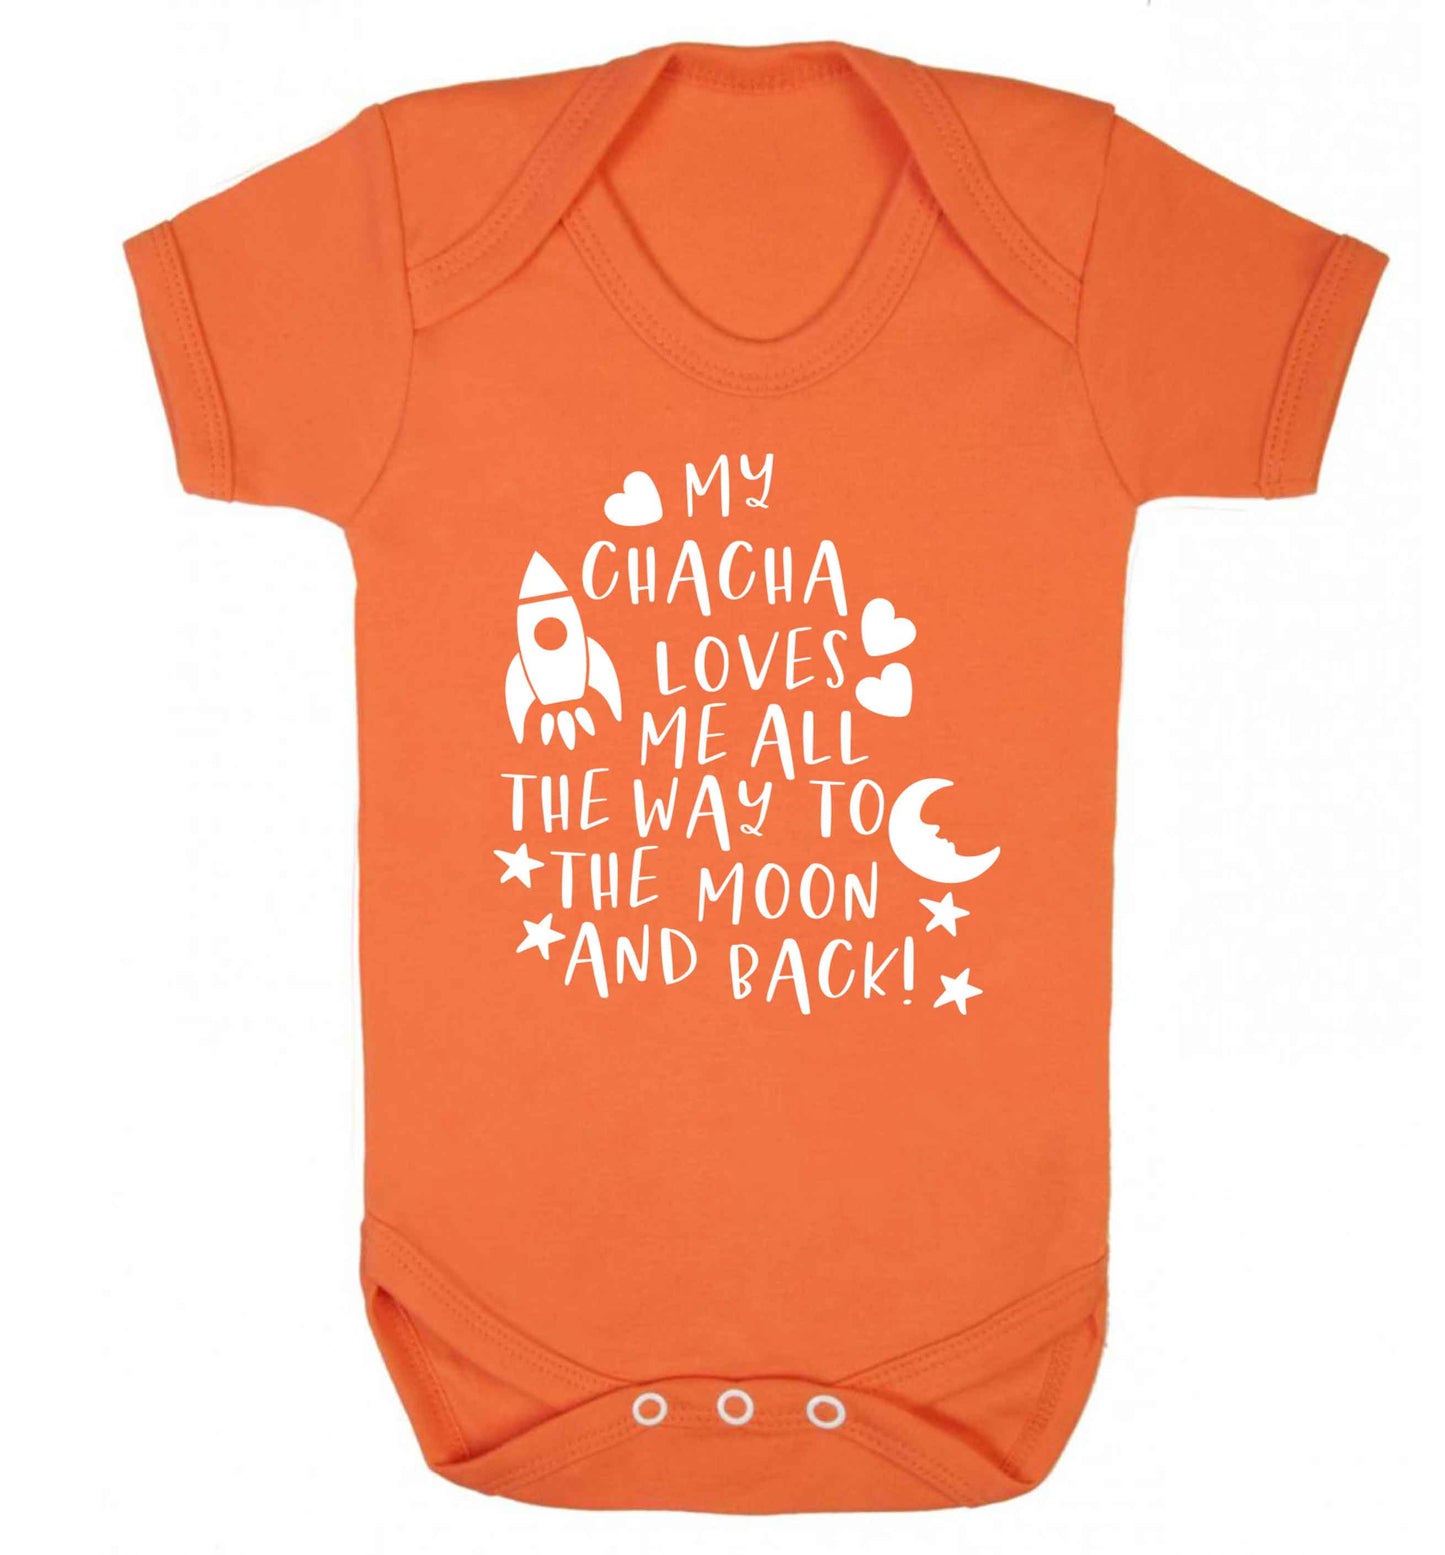 My chacha loves me all the way to the moon and back Baby Vest orange 18-24 months